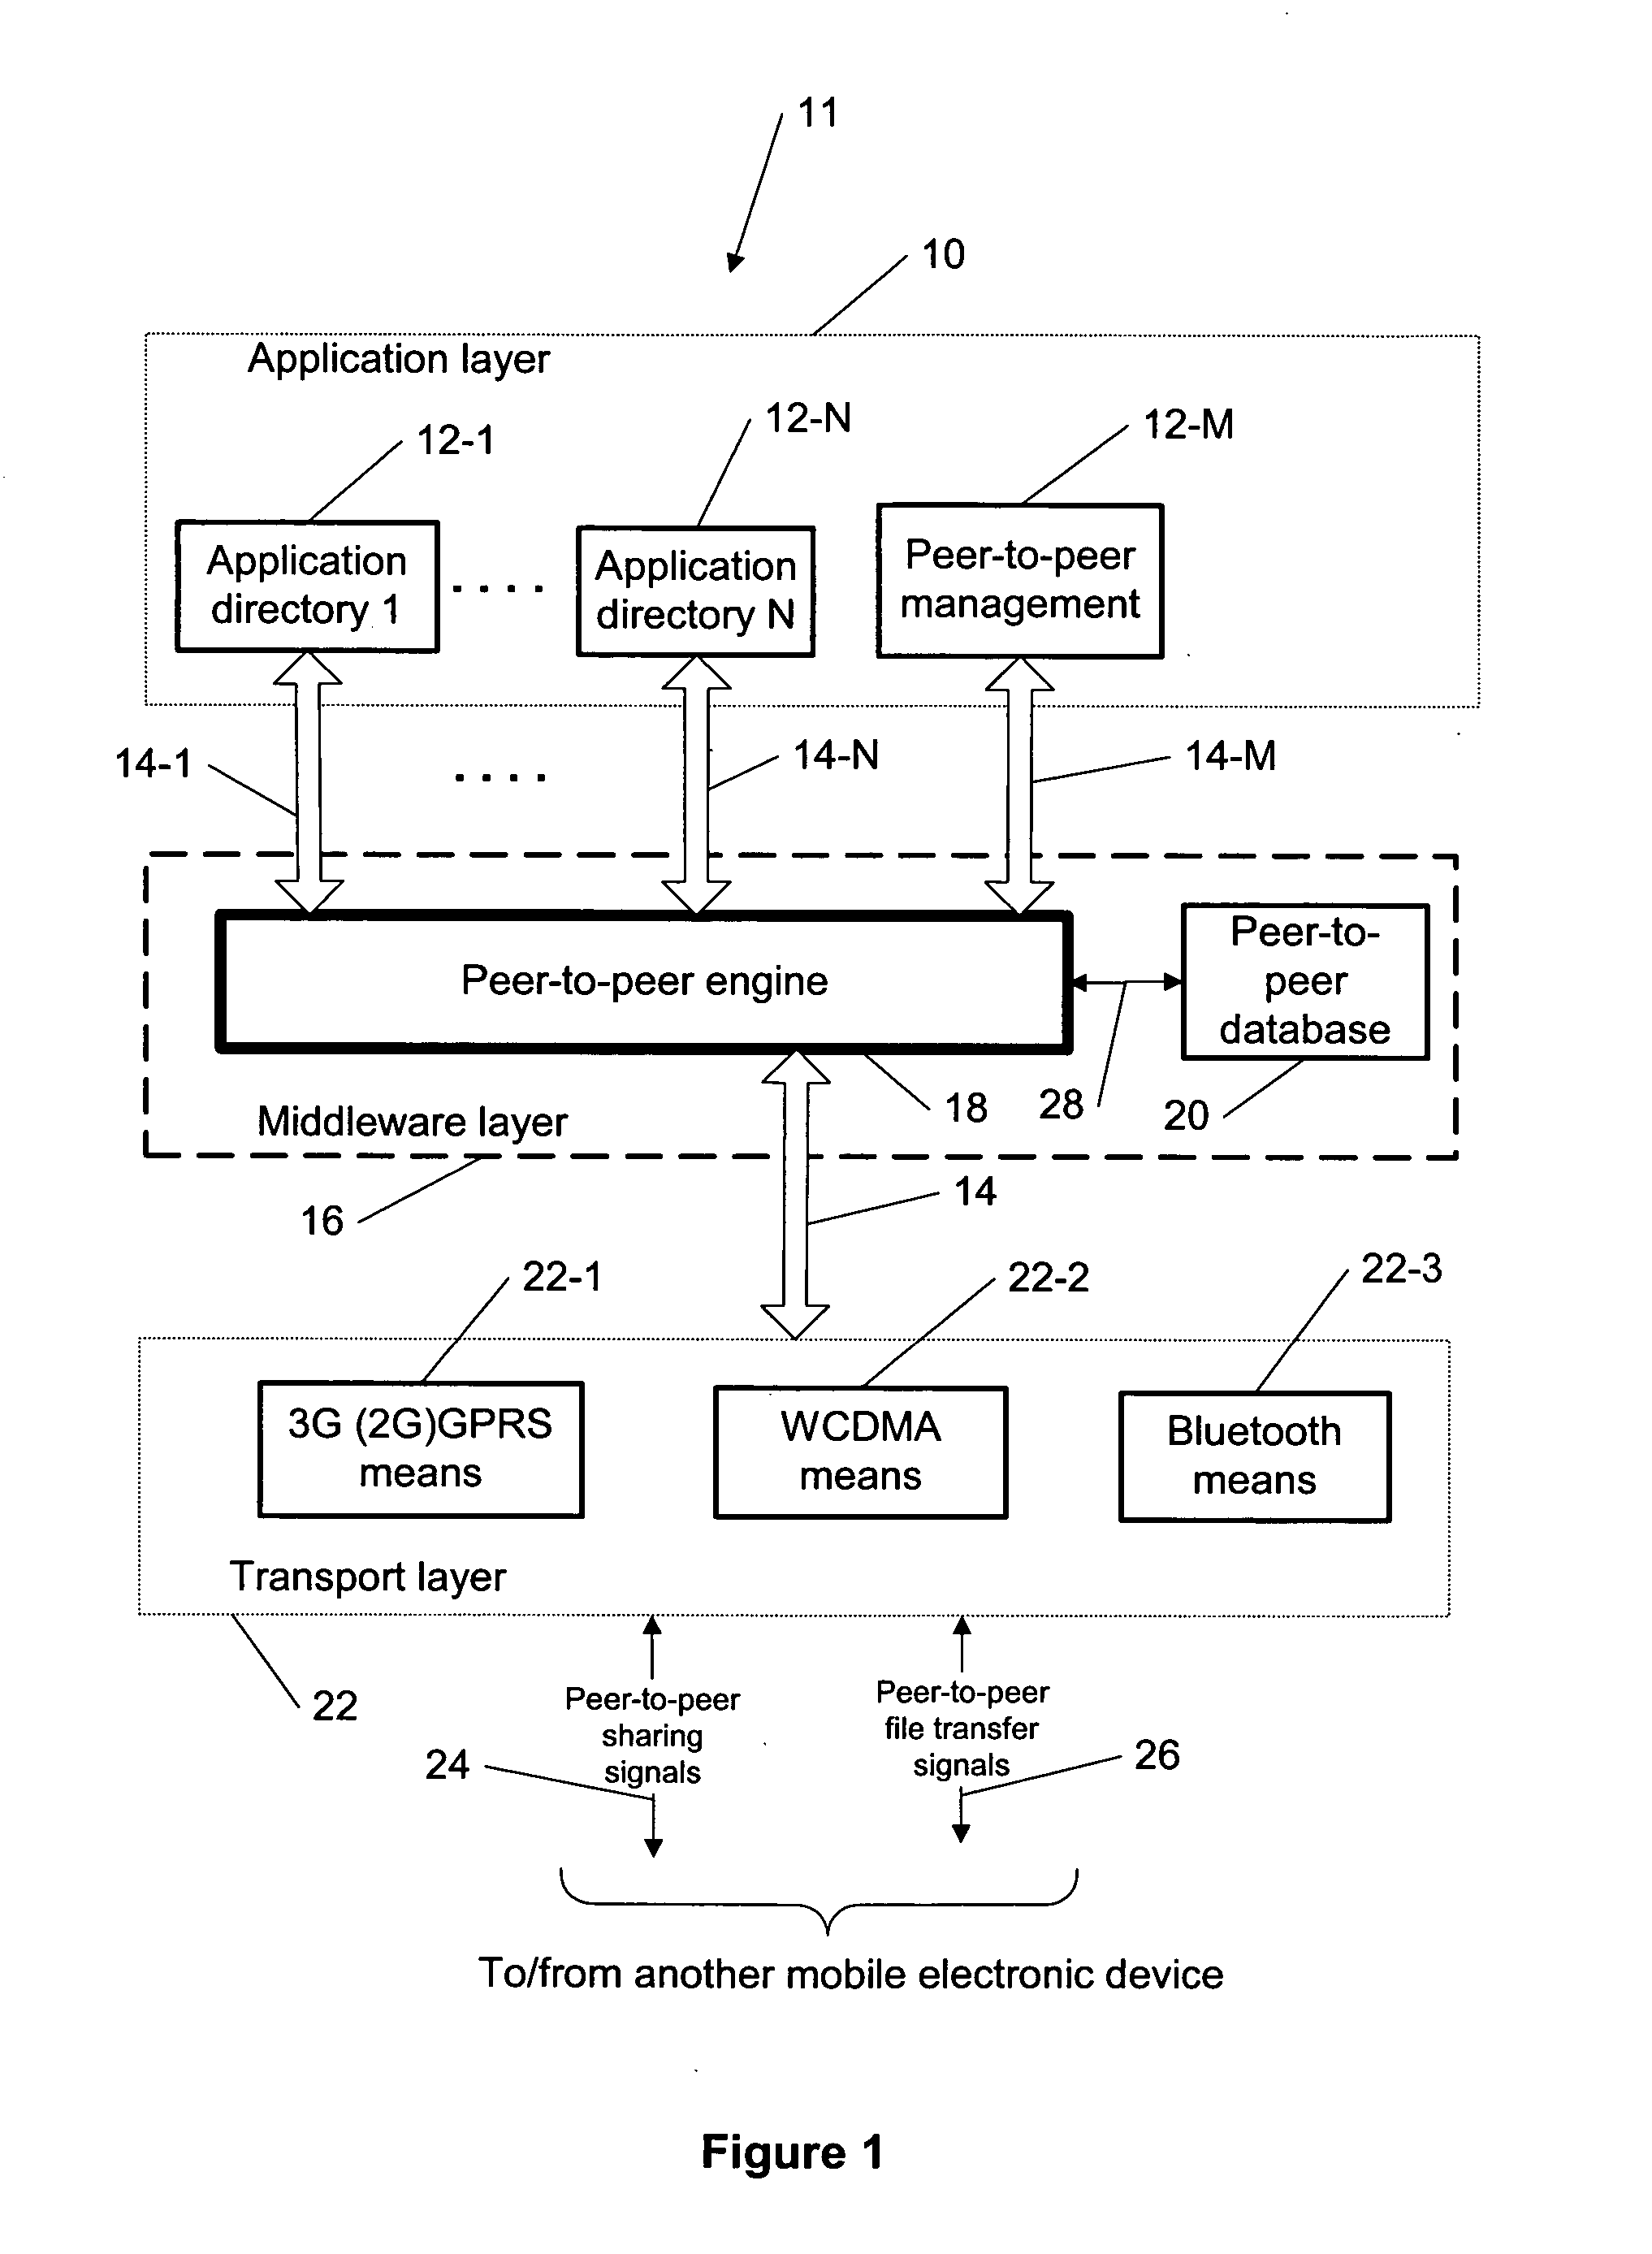 Peer-to-peer engine for object sharing in communication devices